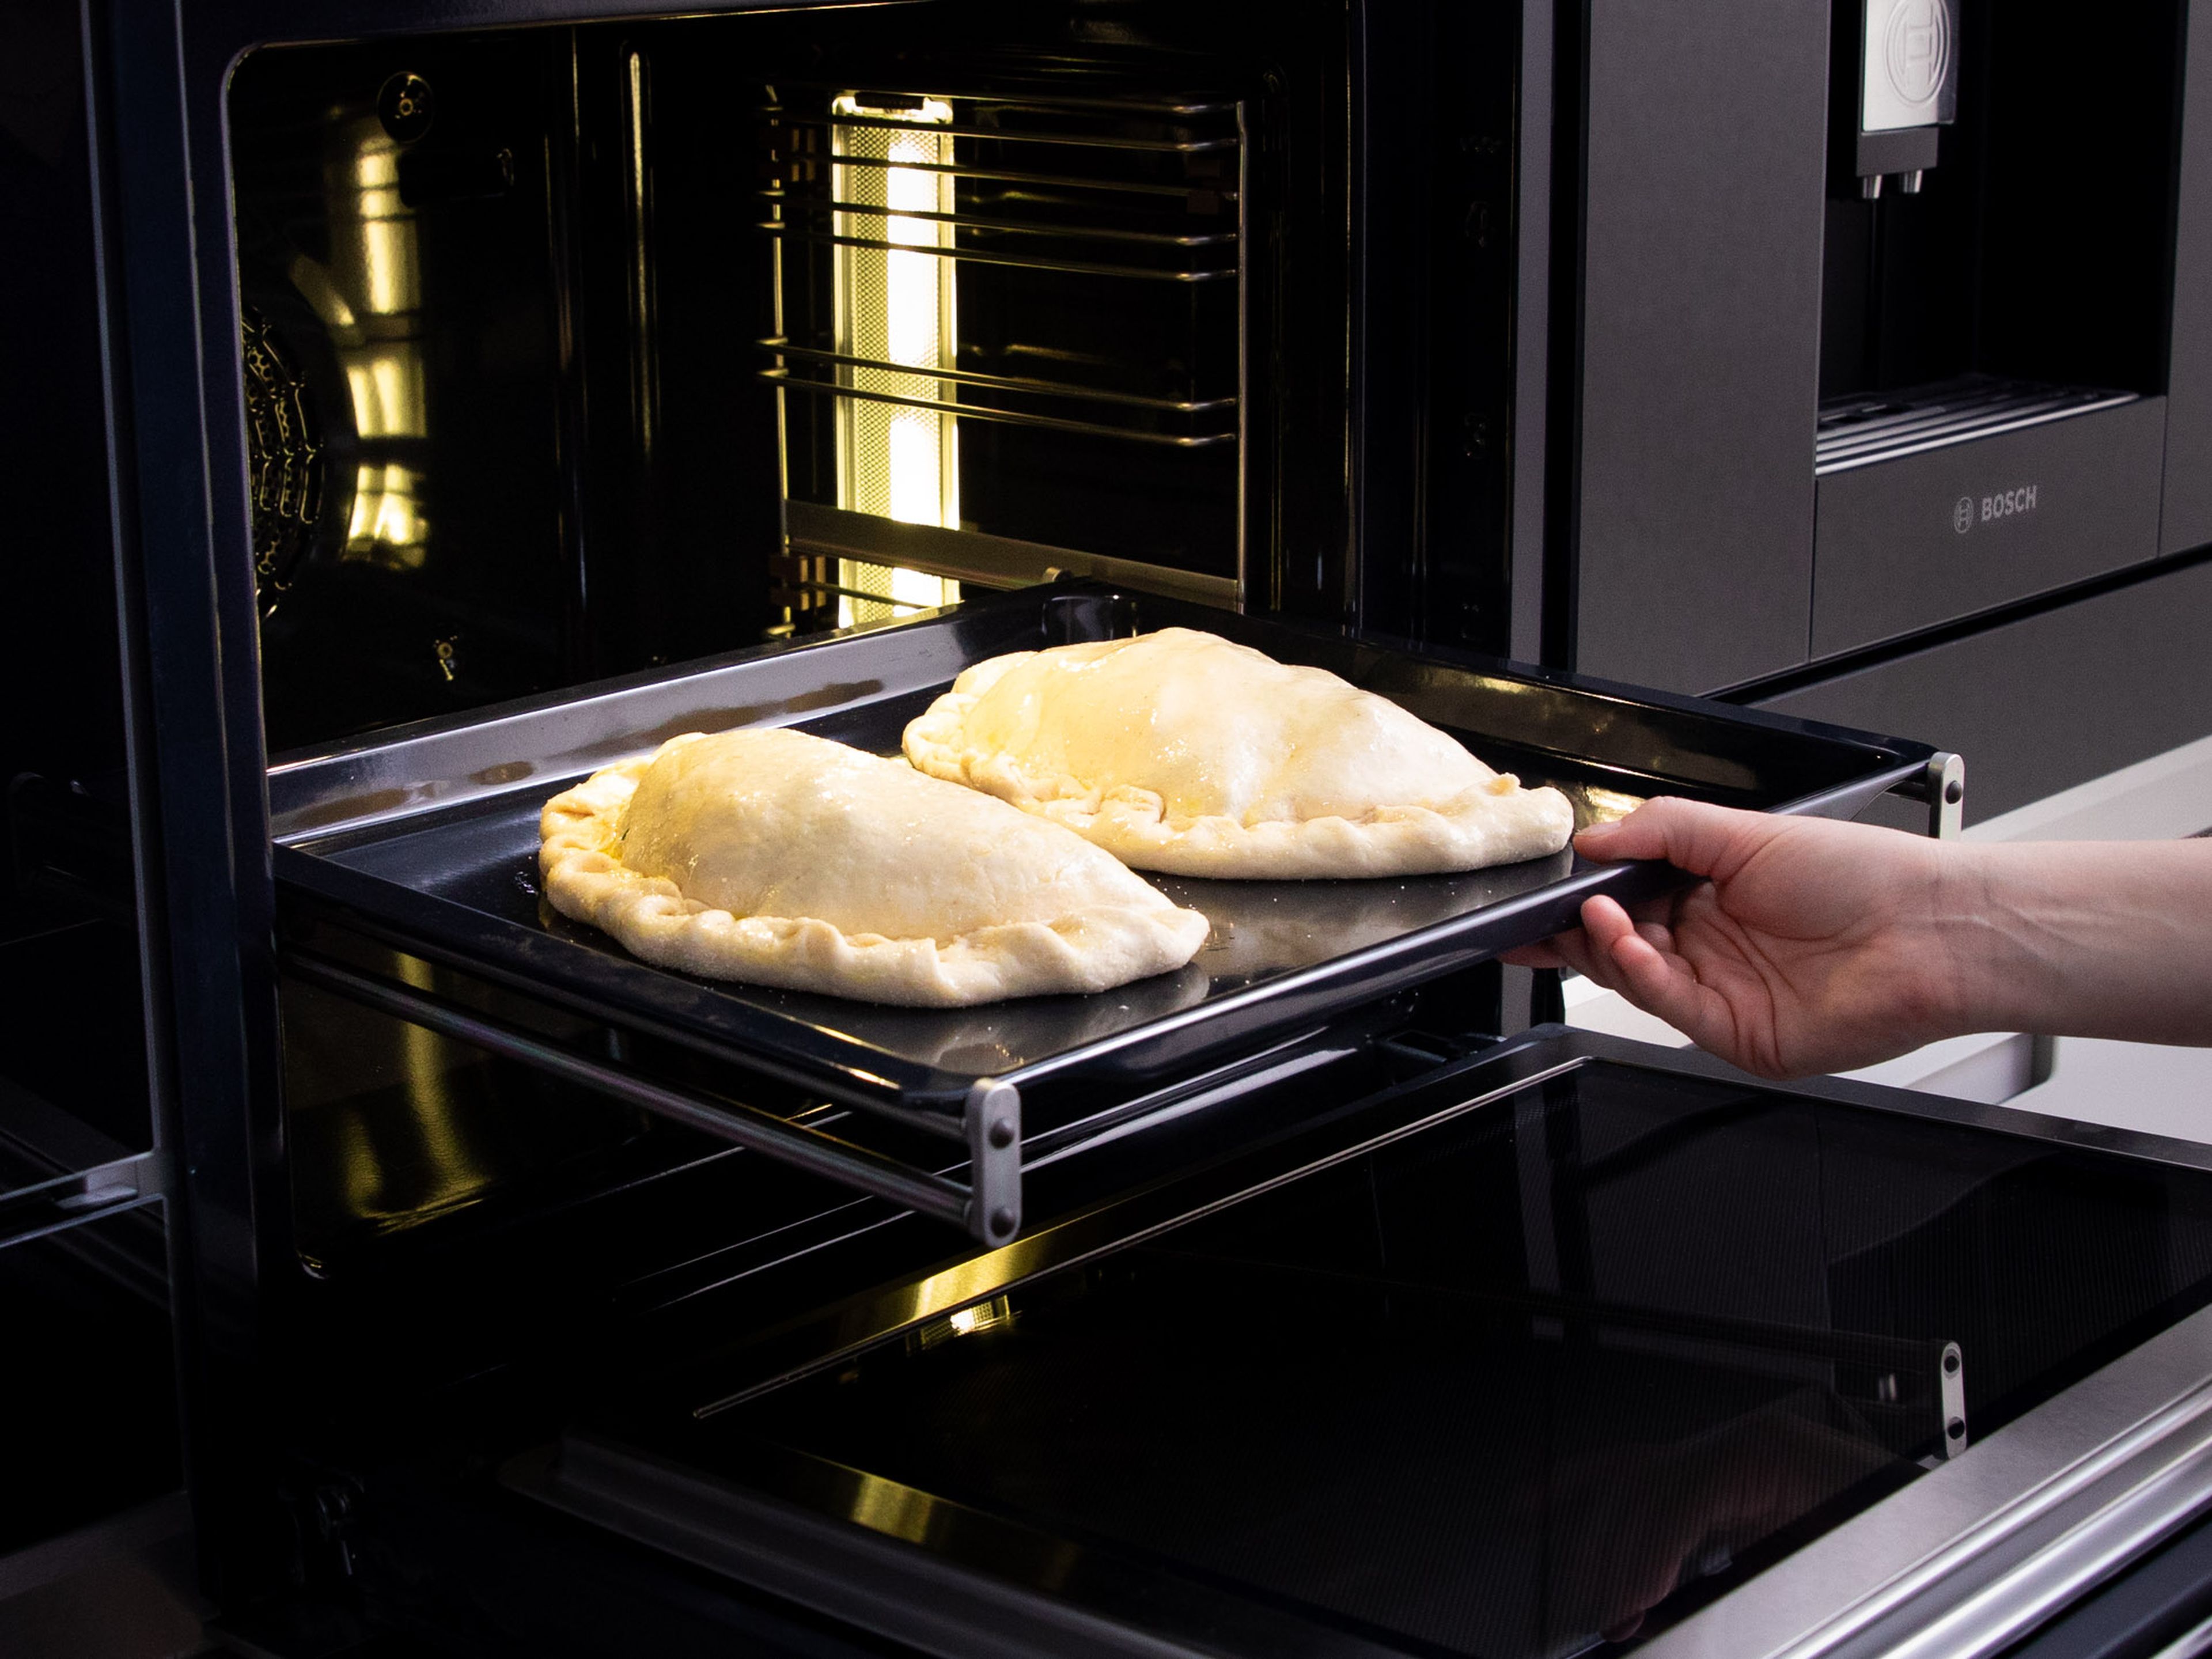 Transfer calzone to a baking sheet and brush with olive oil. Bake at 220°C/430°F for approx. 10 min.